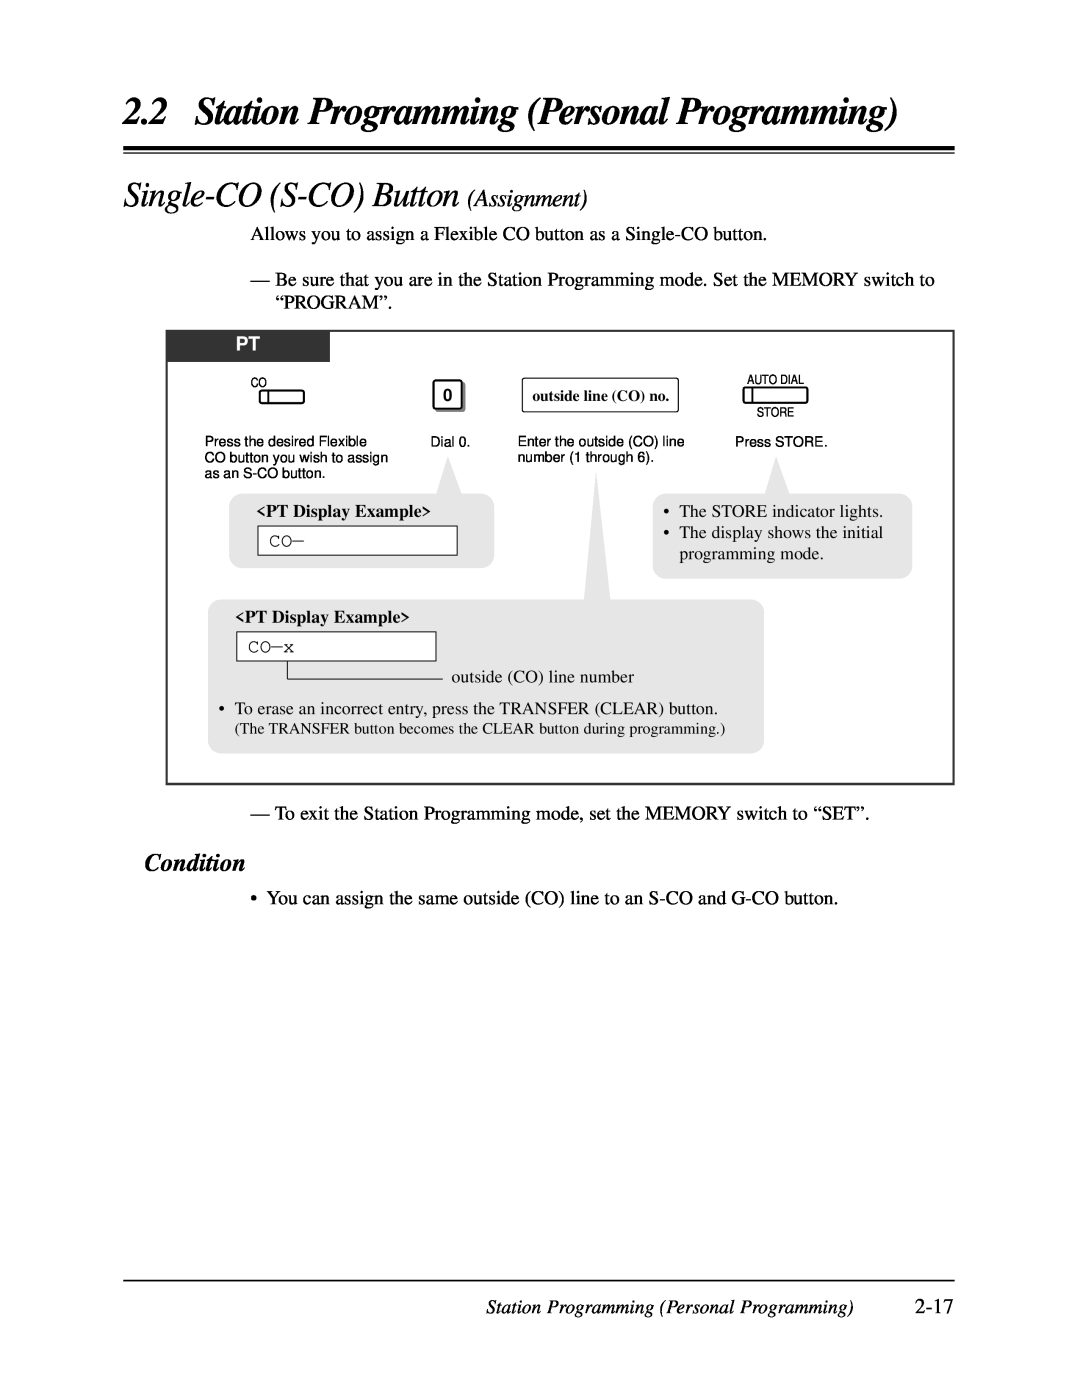 Panasonic KX-TA624 user manual Single-CO S-COButton Assignment, 2-17, Station Programming Personal Programming, Condition 